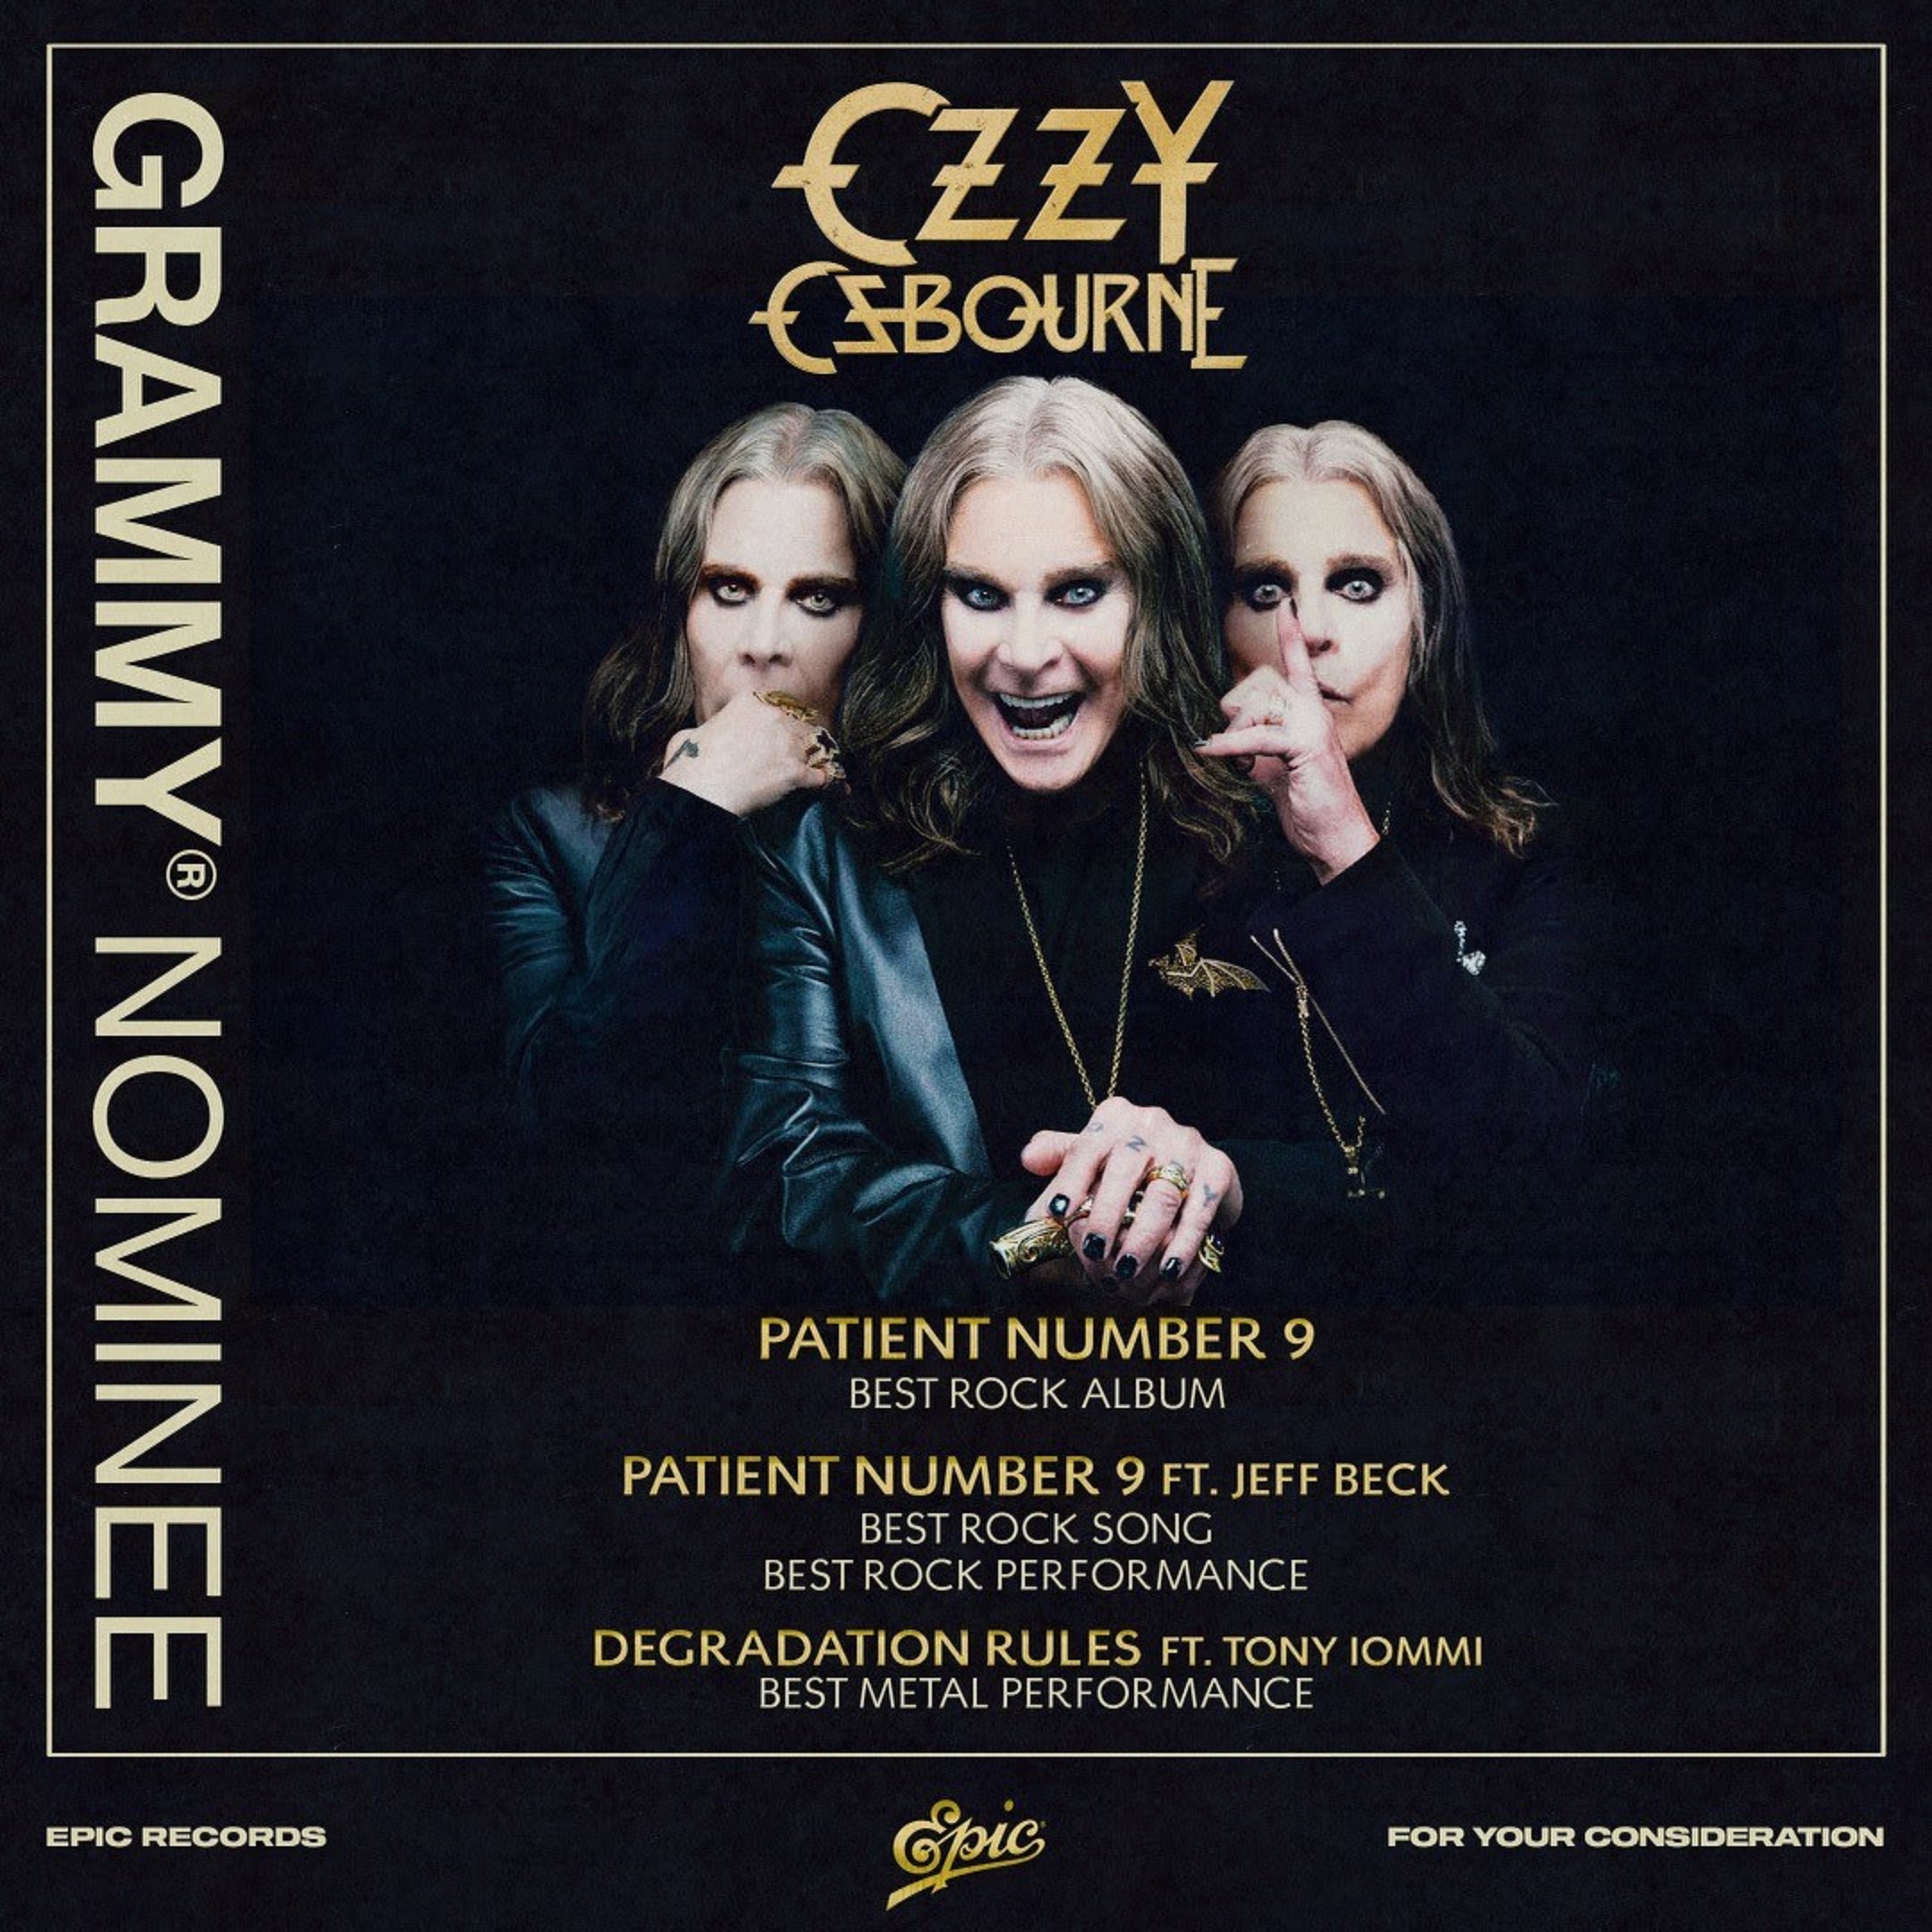 OZZY OSBOURNE Talks About The Four Grammy Nominations For His ‘Patient Number 9’ Album And More